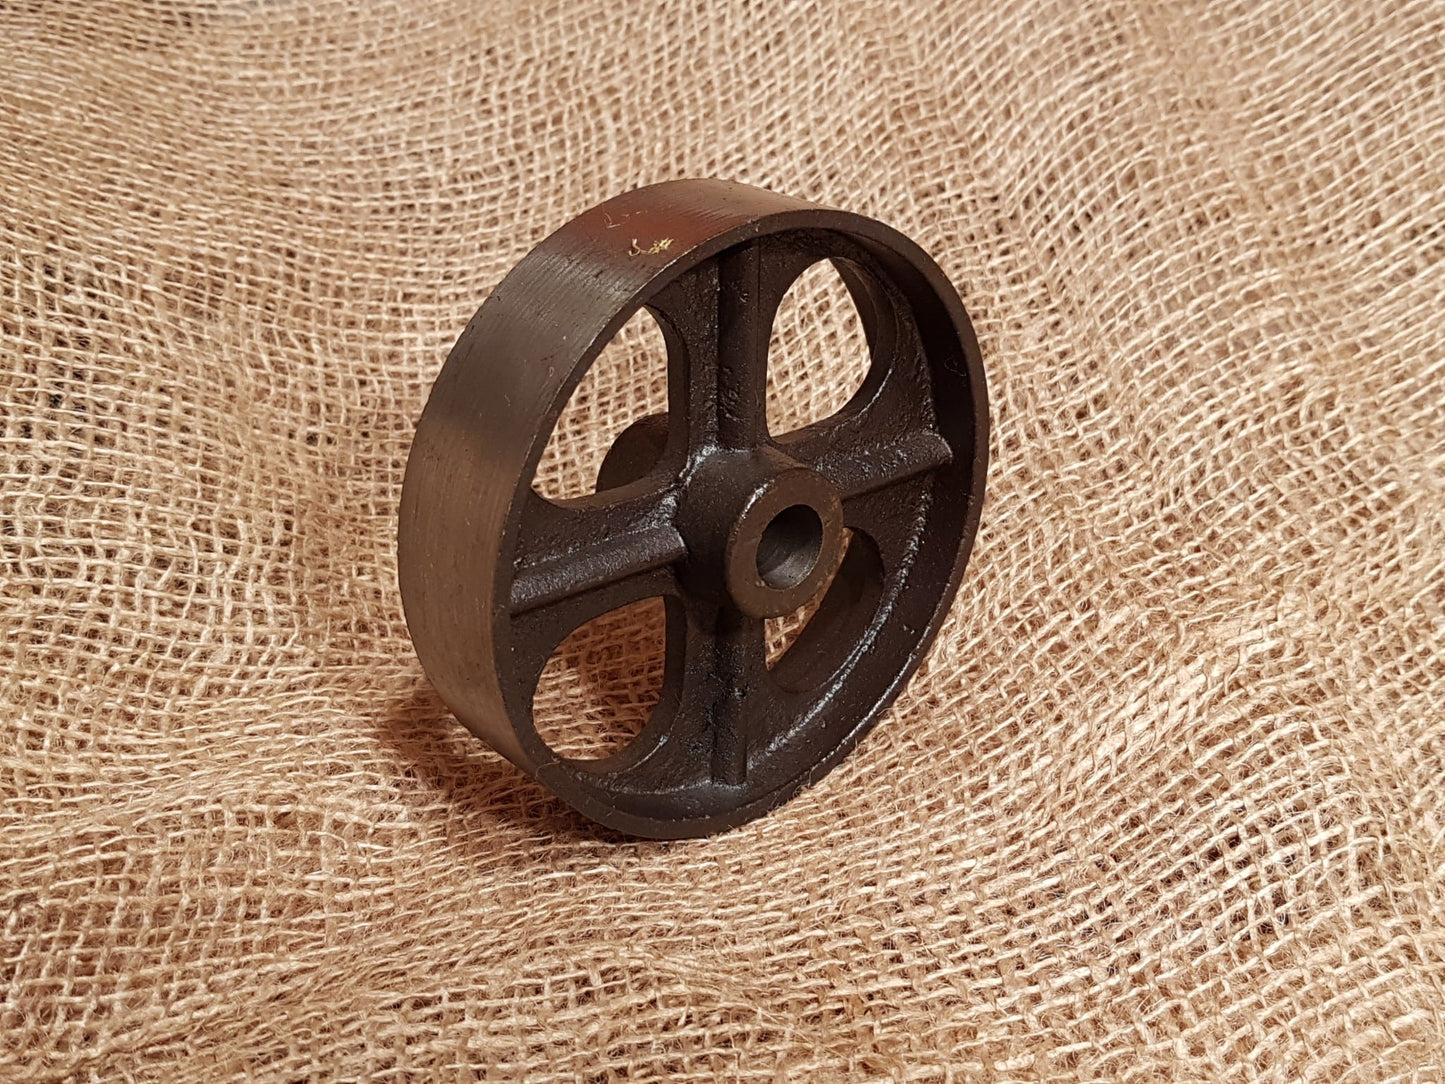 Industrial 4 1/2" Cast Iron Wheel - Spearhead Collection -  - Axles, D.I.Y. - Do It Yourself Projects, Hardware, Industrial hardware, Millwork Hardware